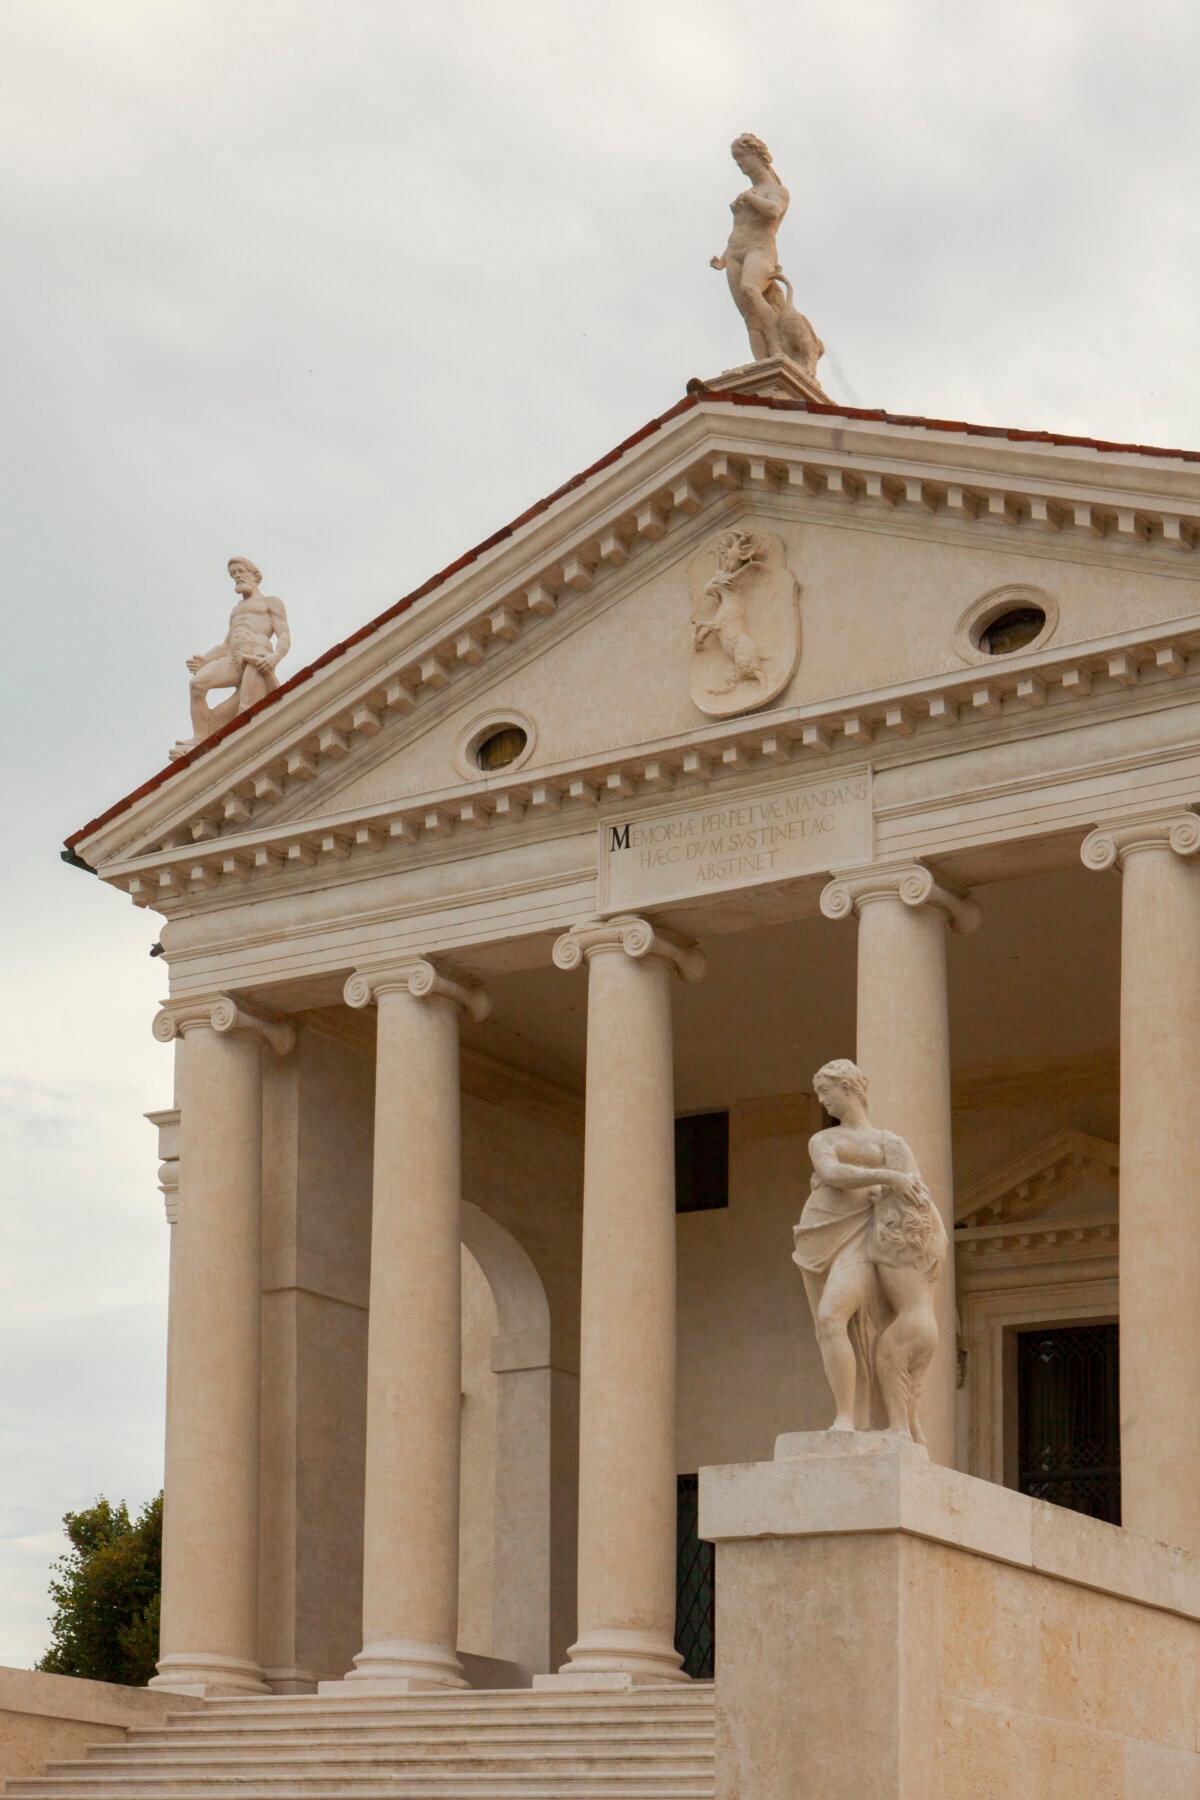 Sculptures in the classical style convey a noble presence at the entrances. They provide residents and guests with a sense that the villa is populated with virtuous beings. (J.H. Smith)